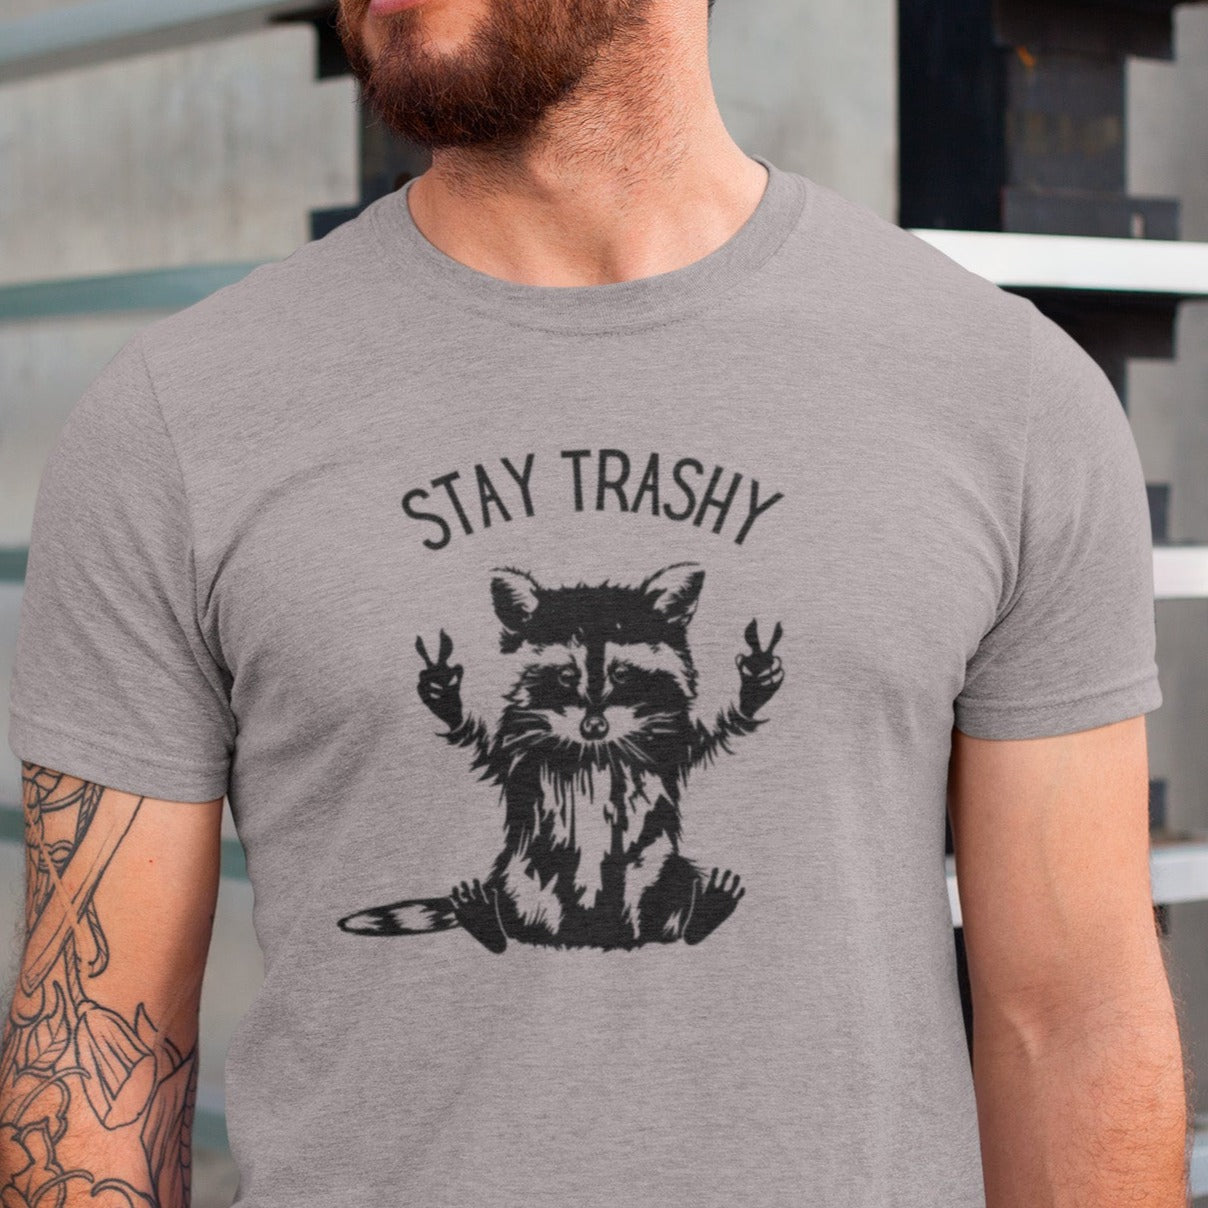 stay-trashy-with-racoon-athletic-heather-t-shirt-unisex-mockup-featuring-a-man-with-tattoos-on-one-arm